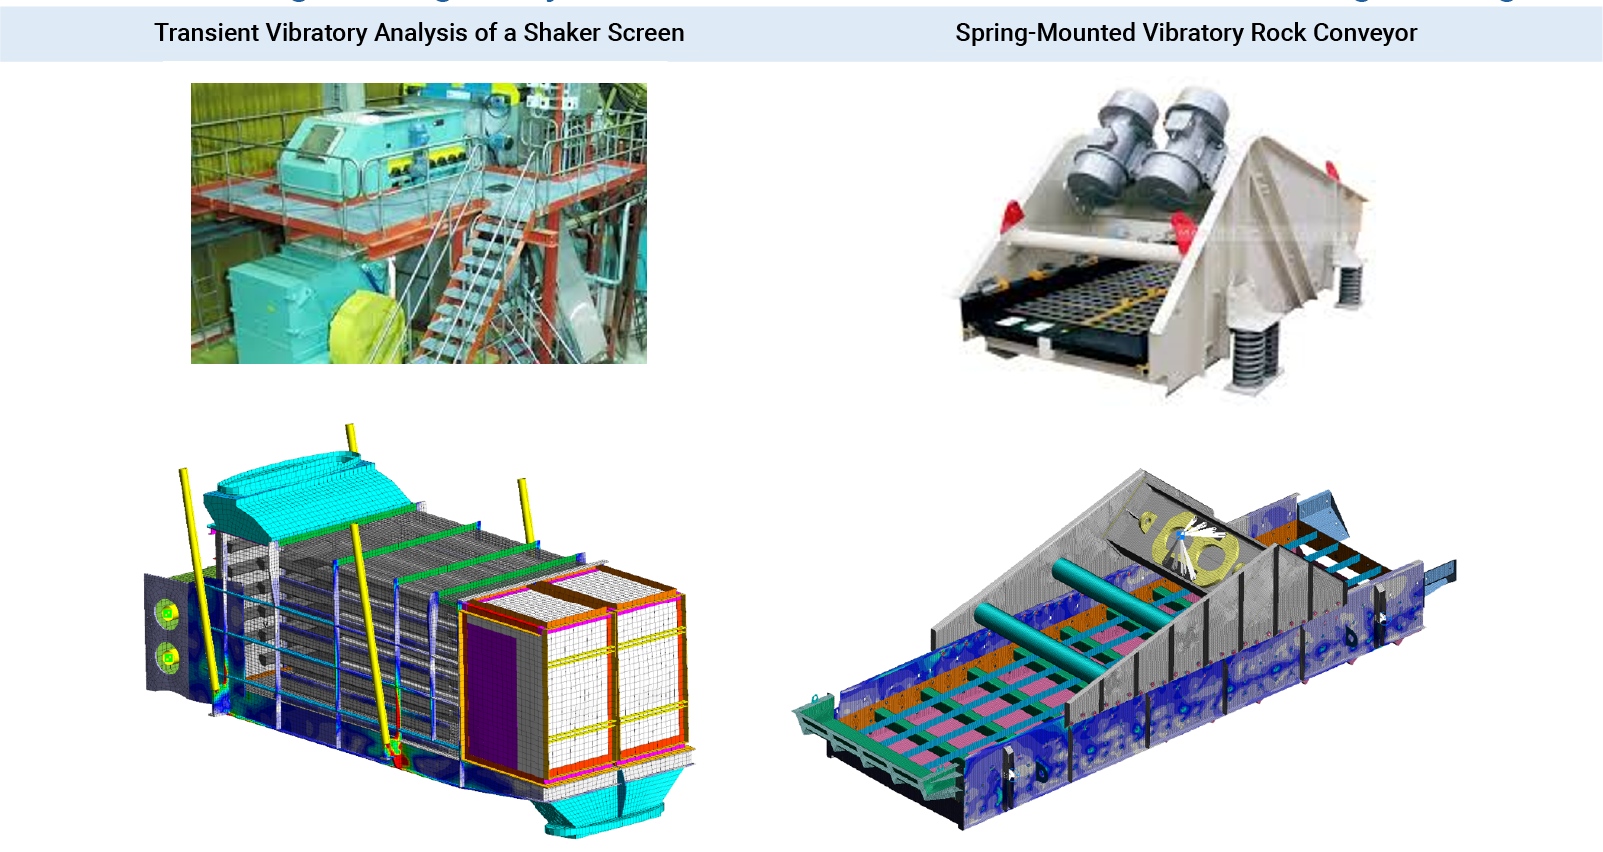 Vibration and Fatigue Analysis of Vibrating Equipment from Shaker Screens, Vibratory Shakers and PSD Analysis of Satellites - FEA Services